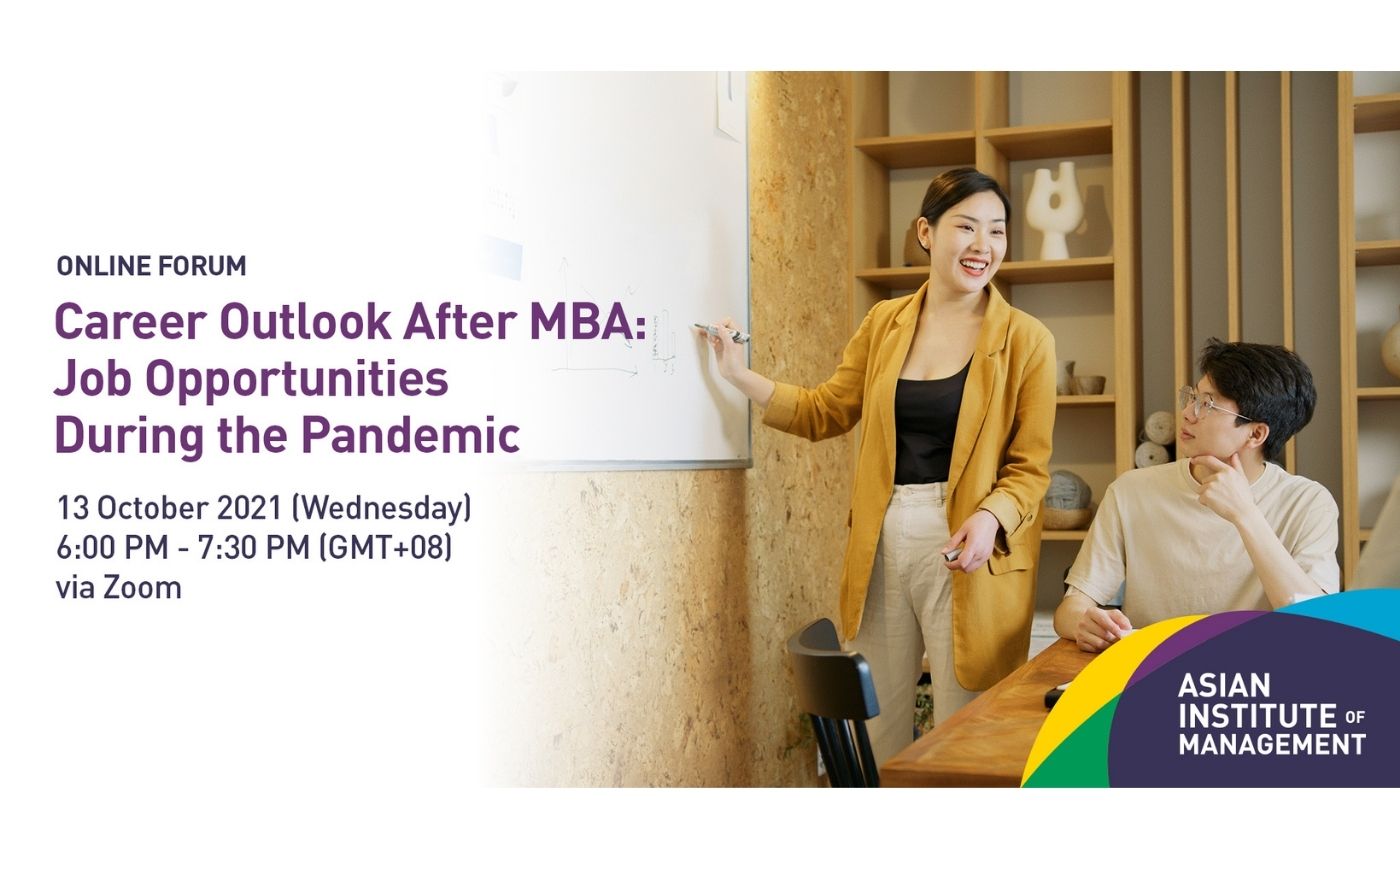 Career Outlook after MBA: Job Opportunities During the Pandemic